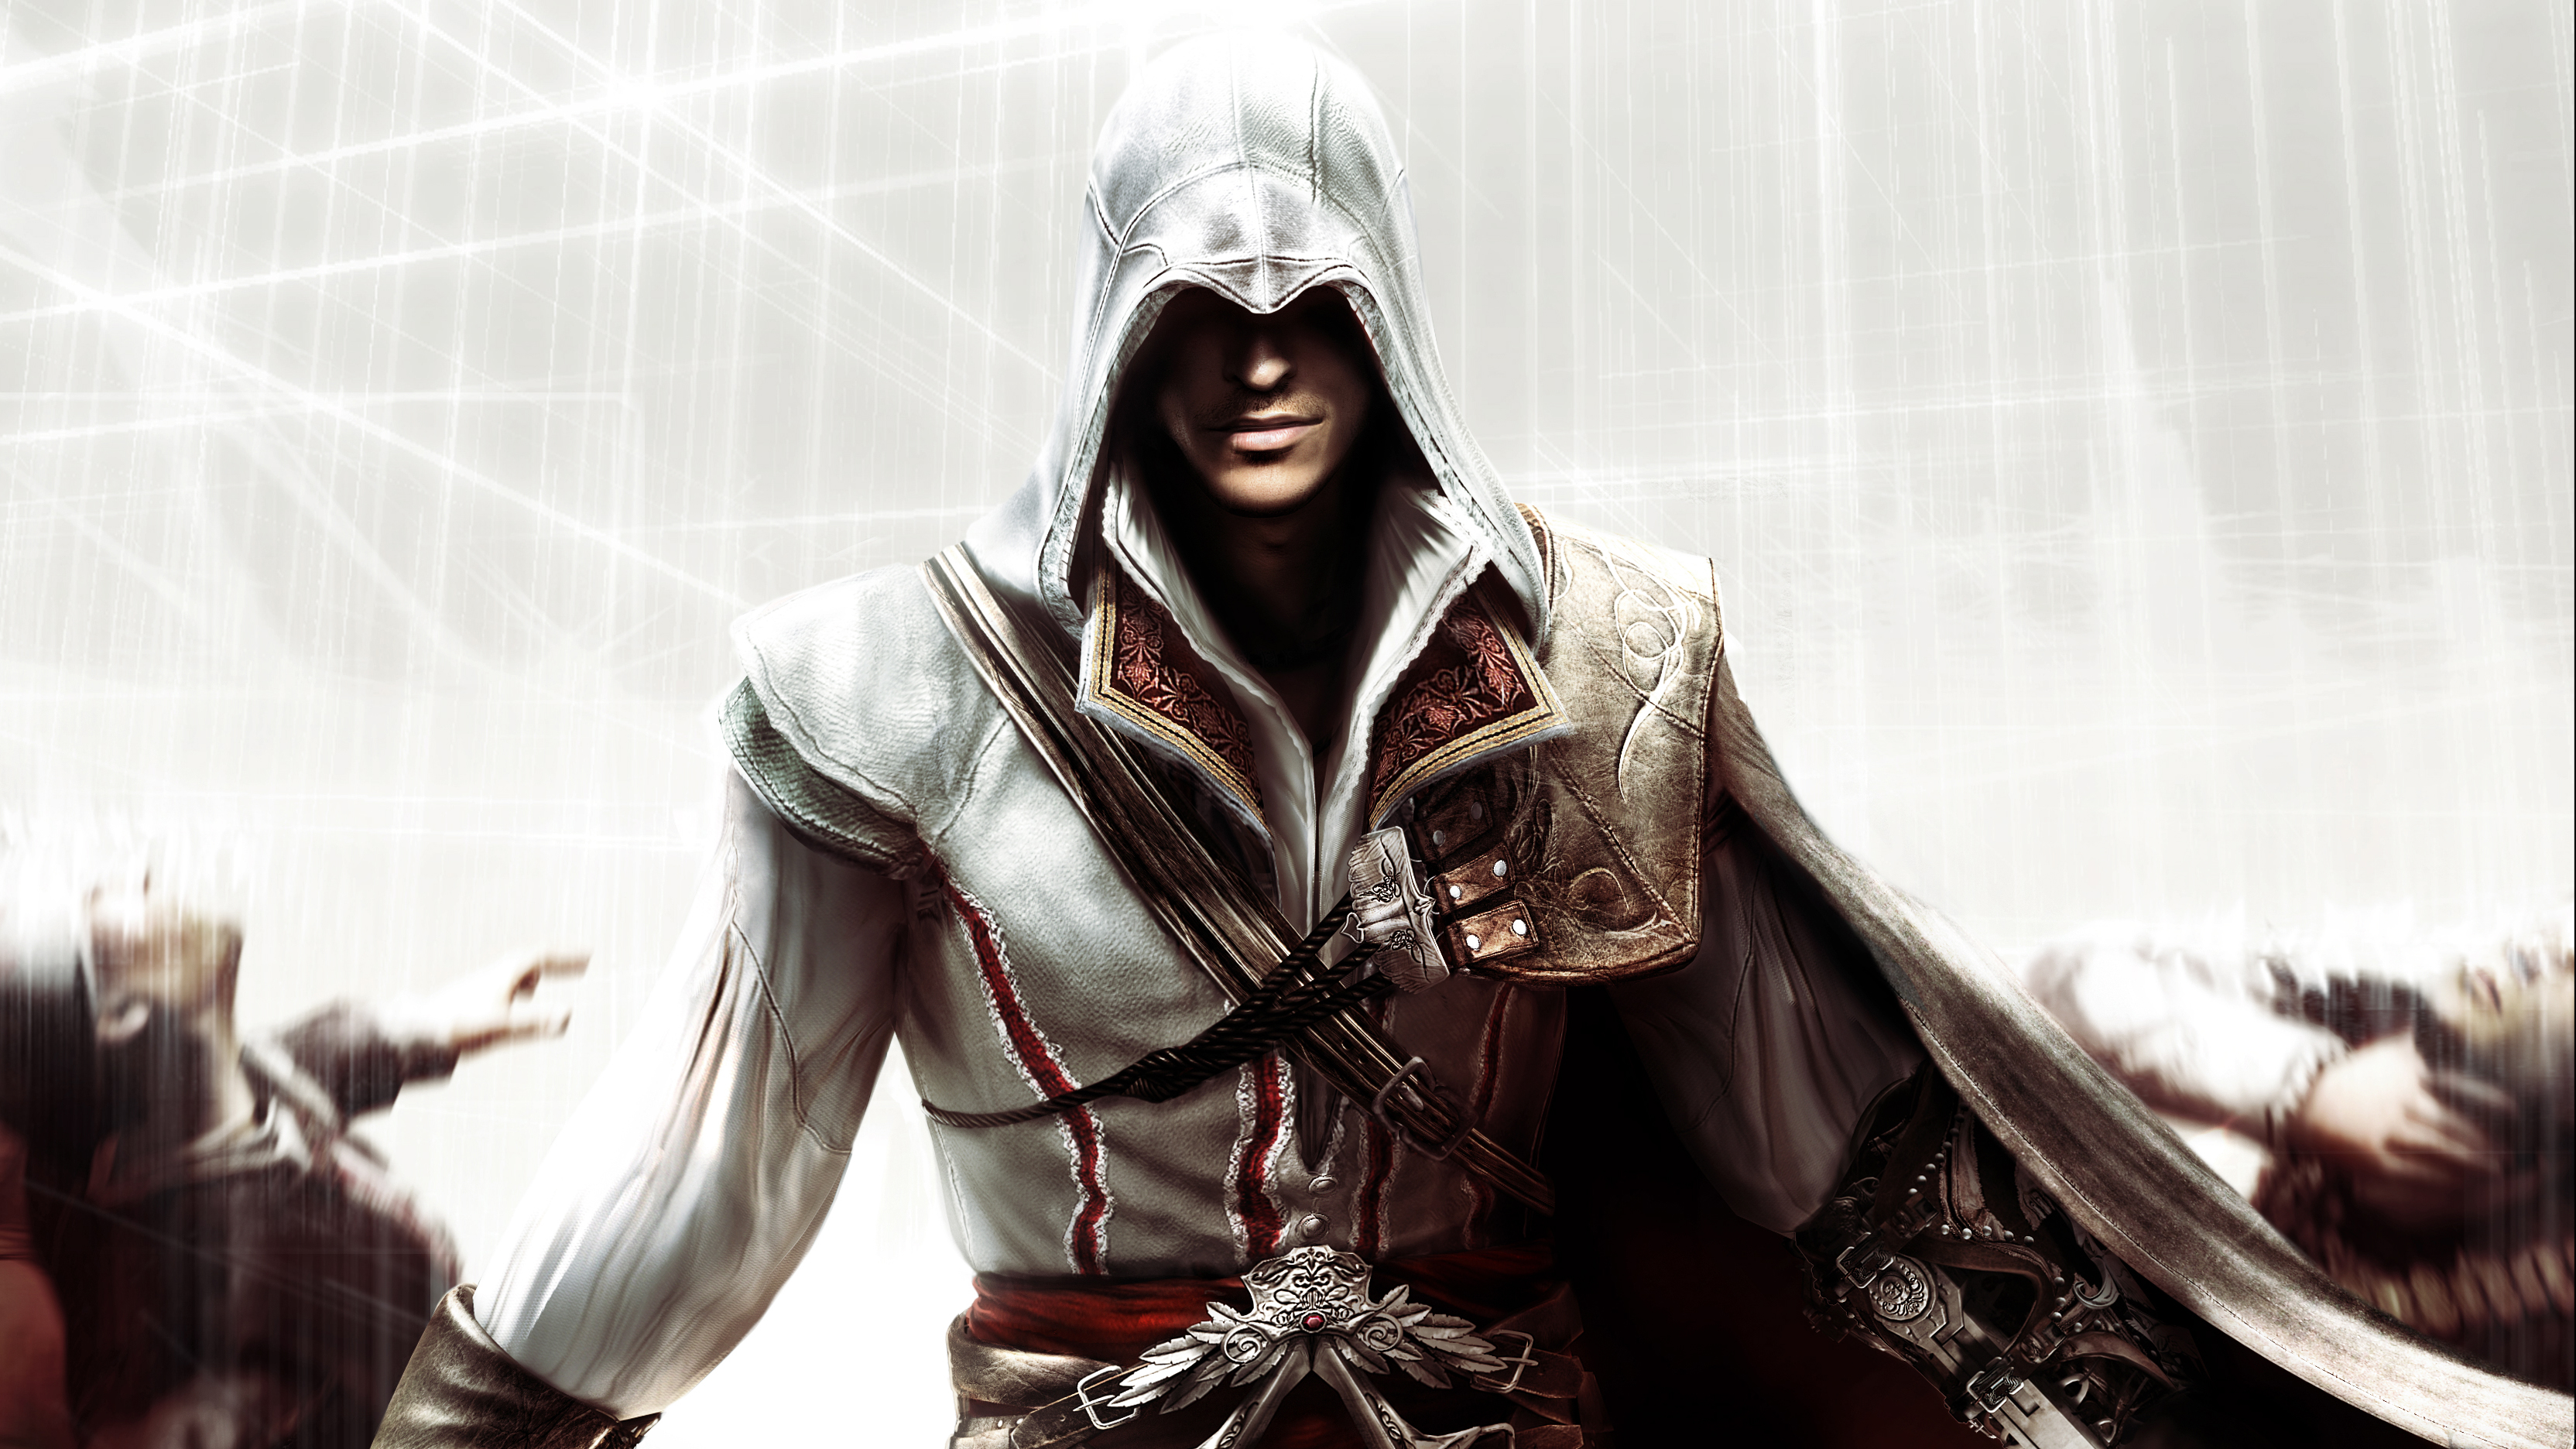 game assassin creed 2